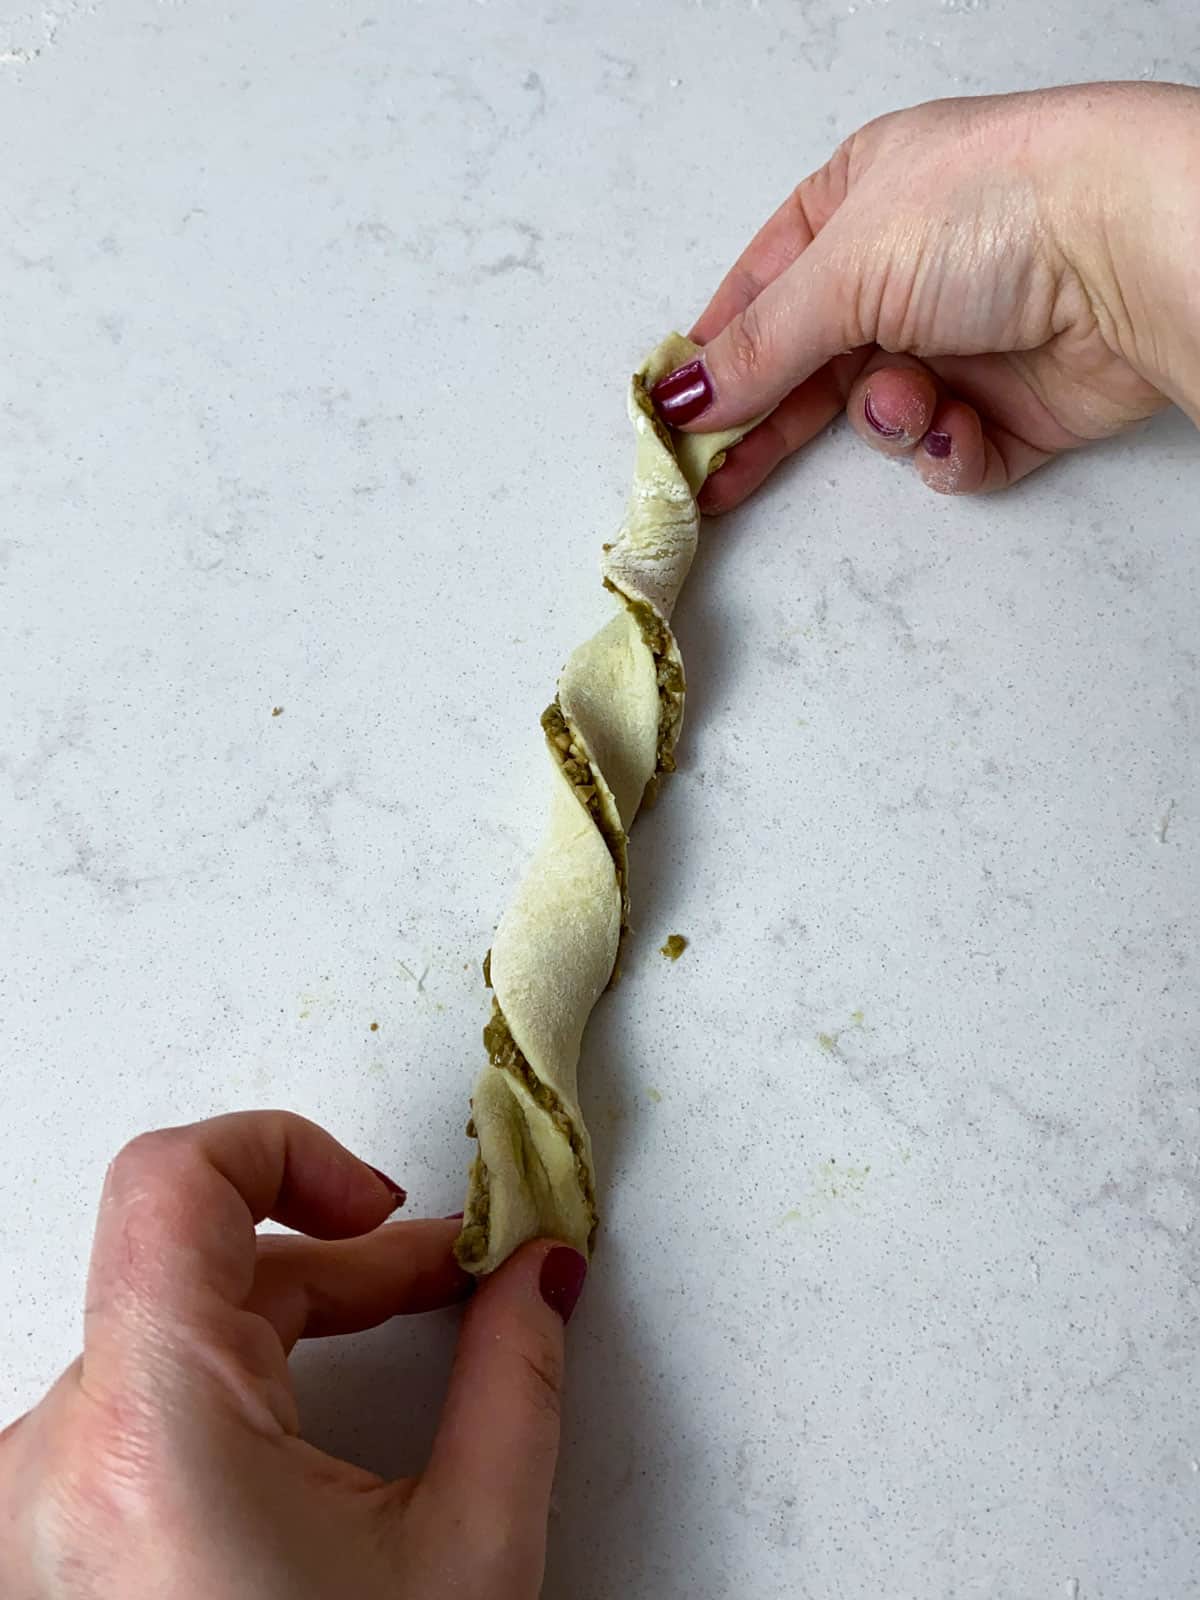 Twist the puff pastry into a spiral.